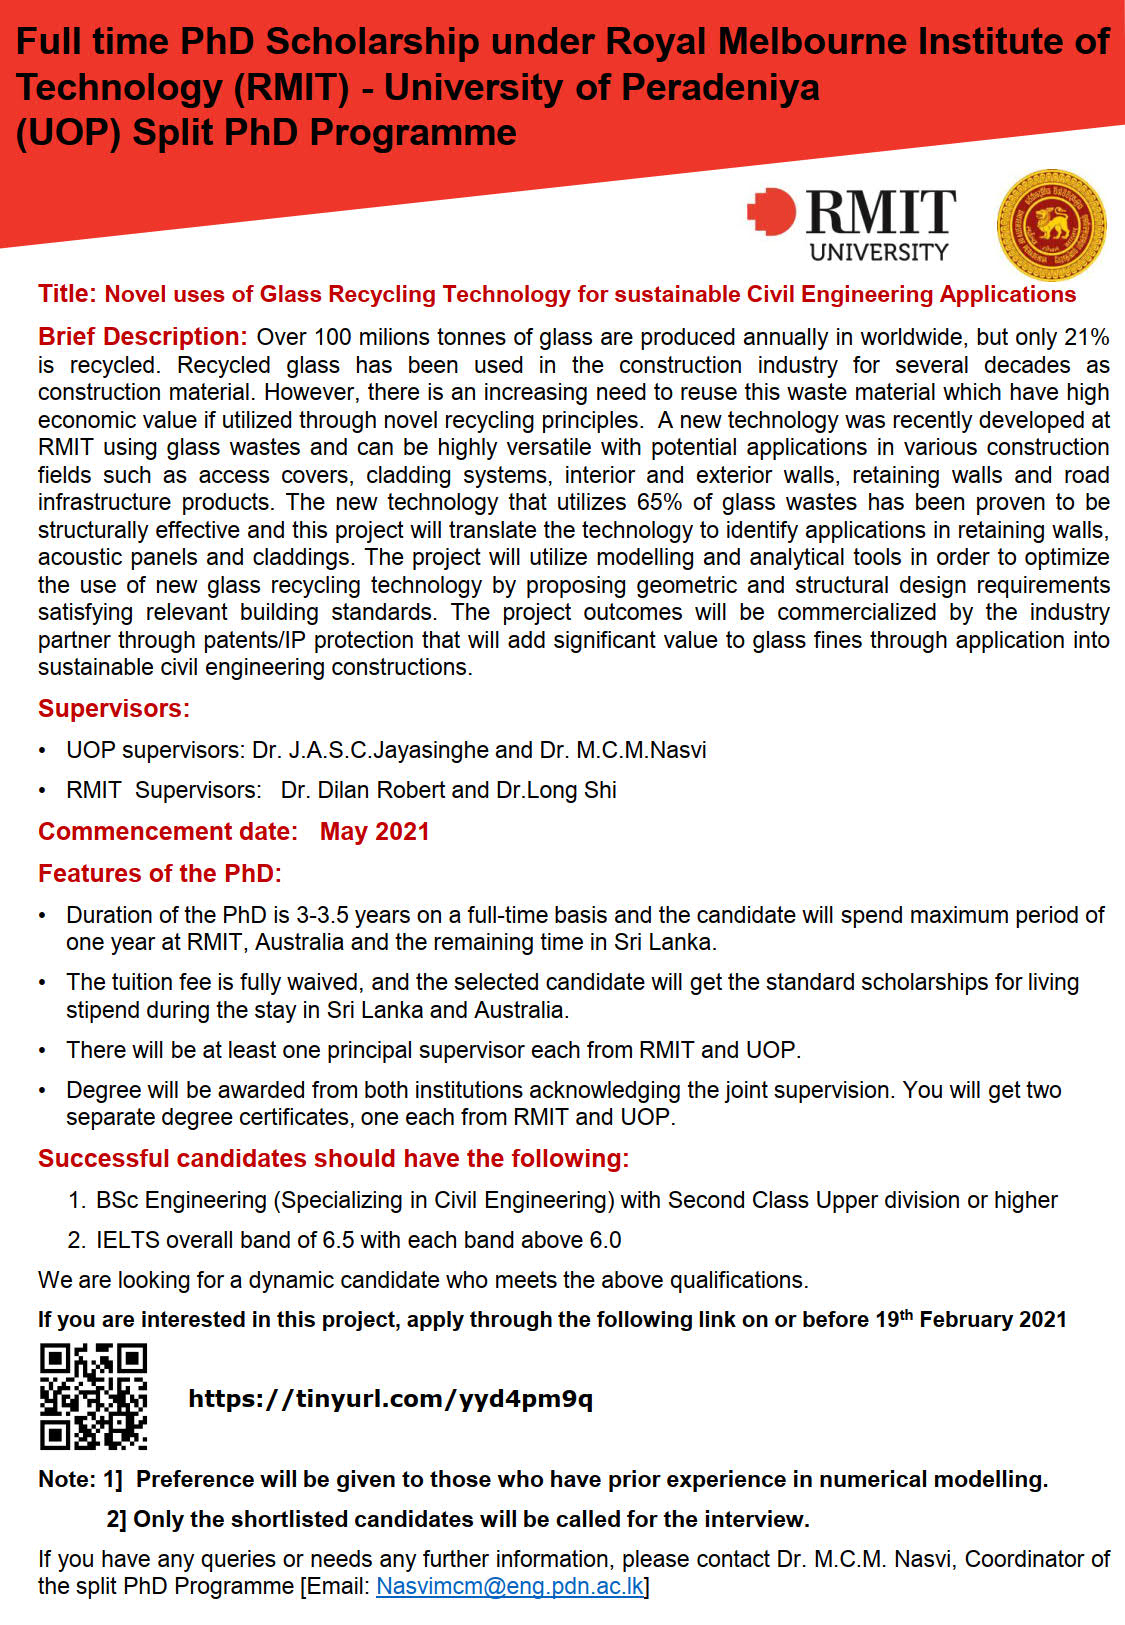 Full time PhD Scholarship-RMIT and UOP- Novel uses of Glass Recycling Technology for sustainable